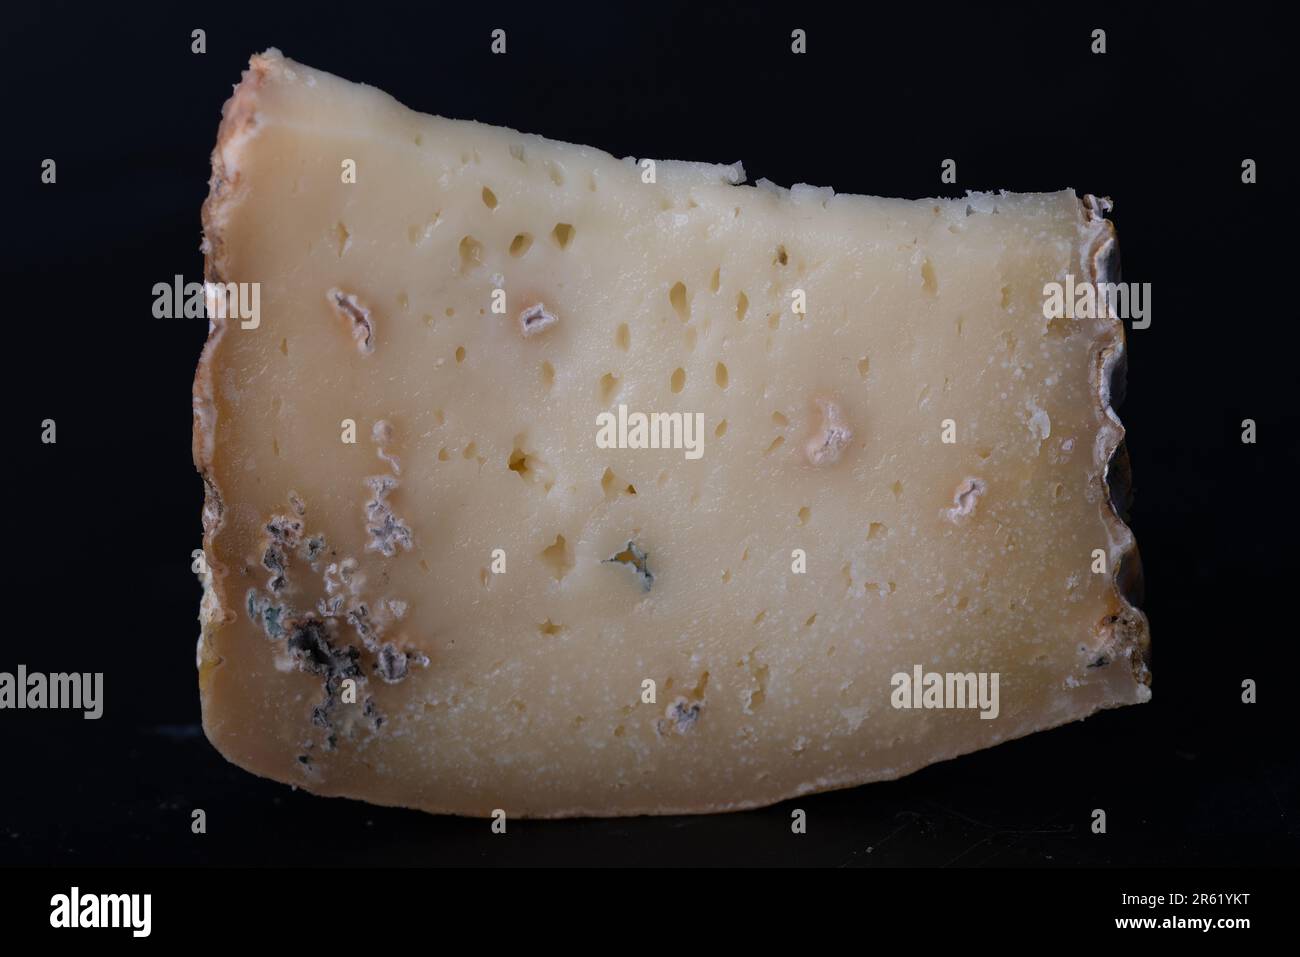 Piece of cheese fermented by bacteria with fungus and mold Stock Photo